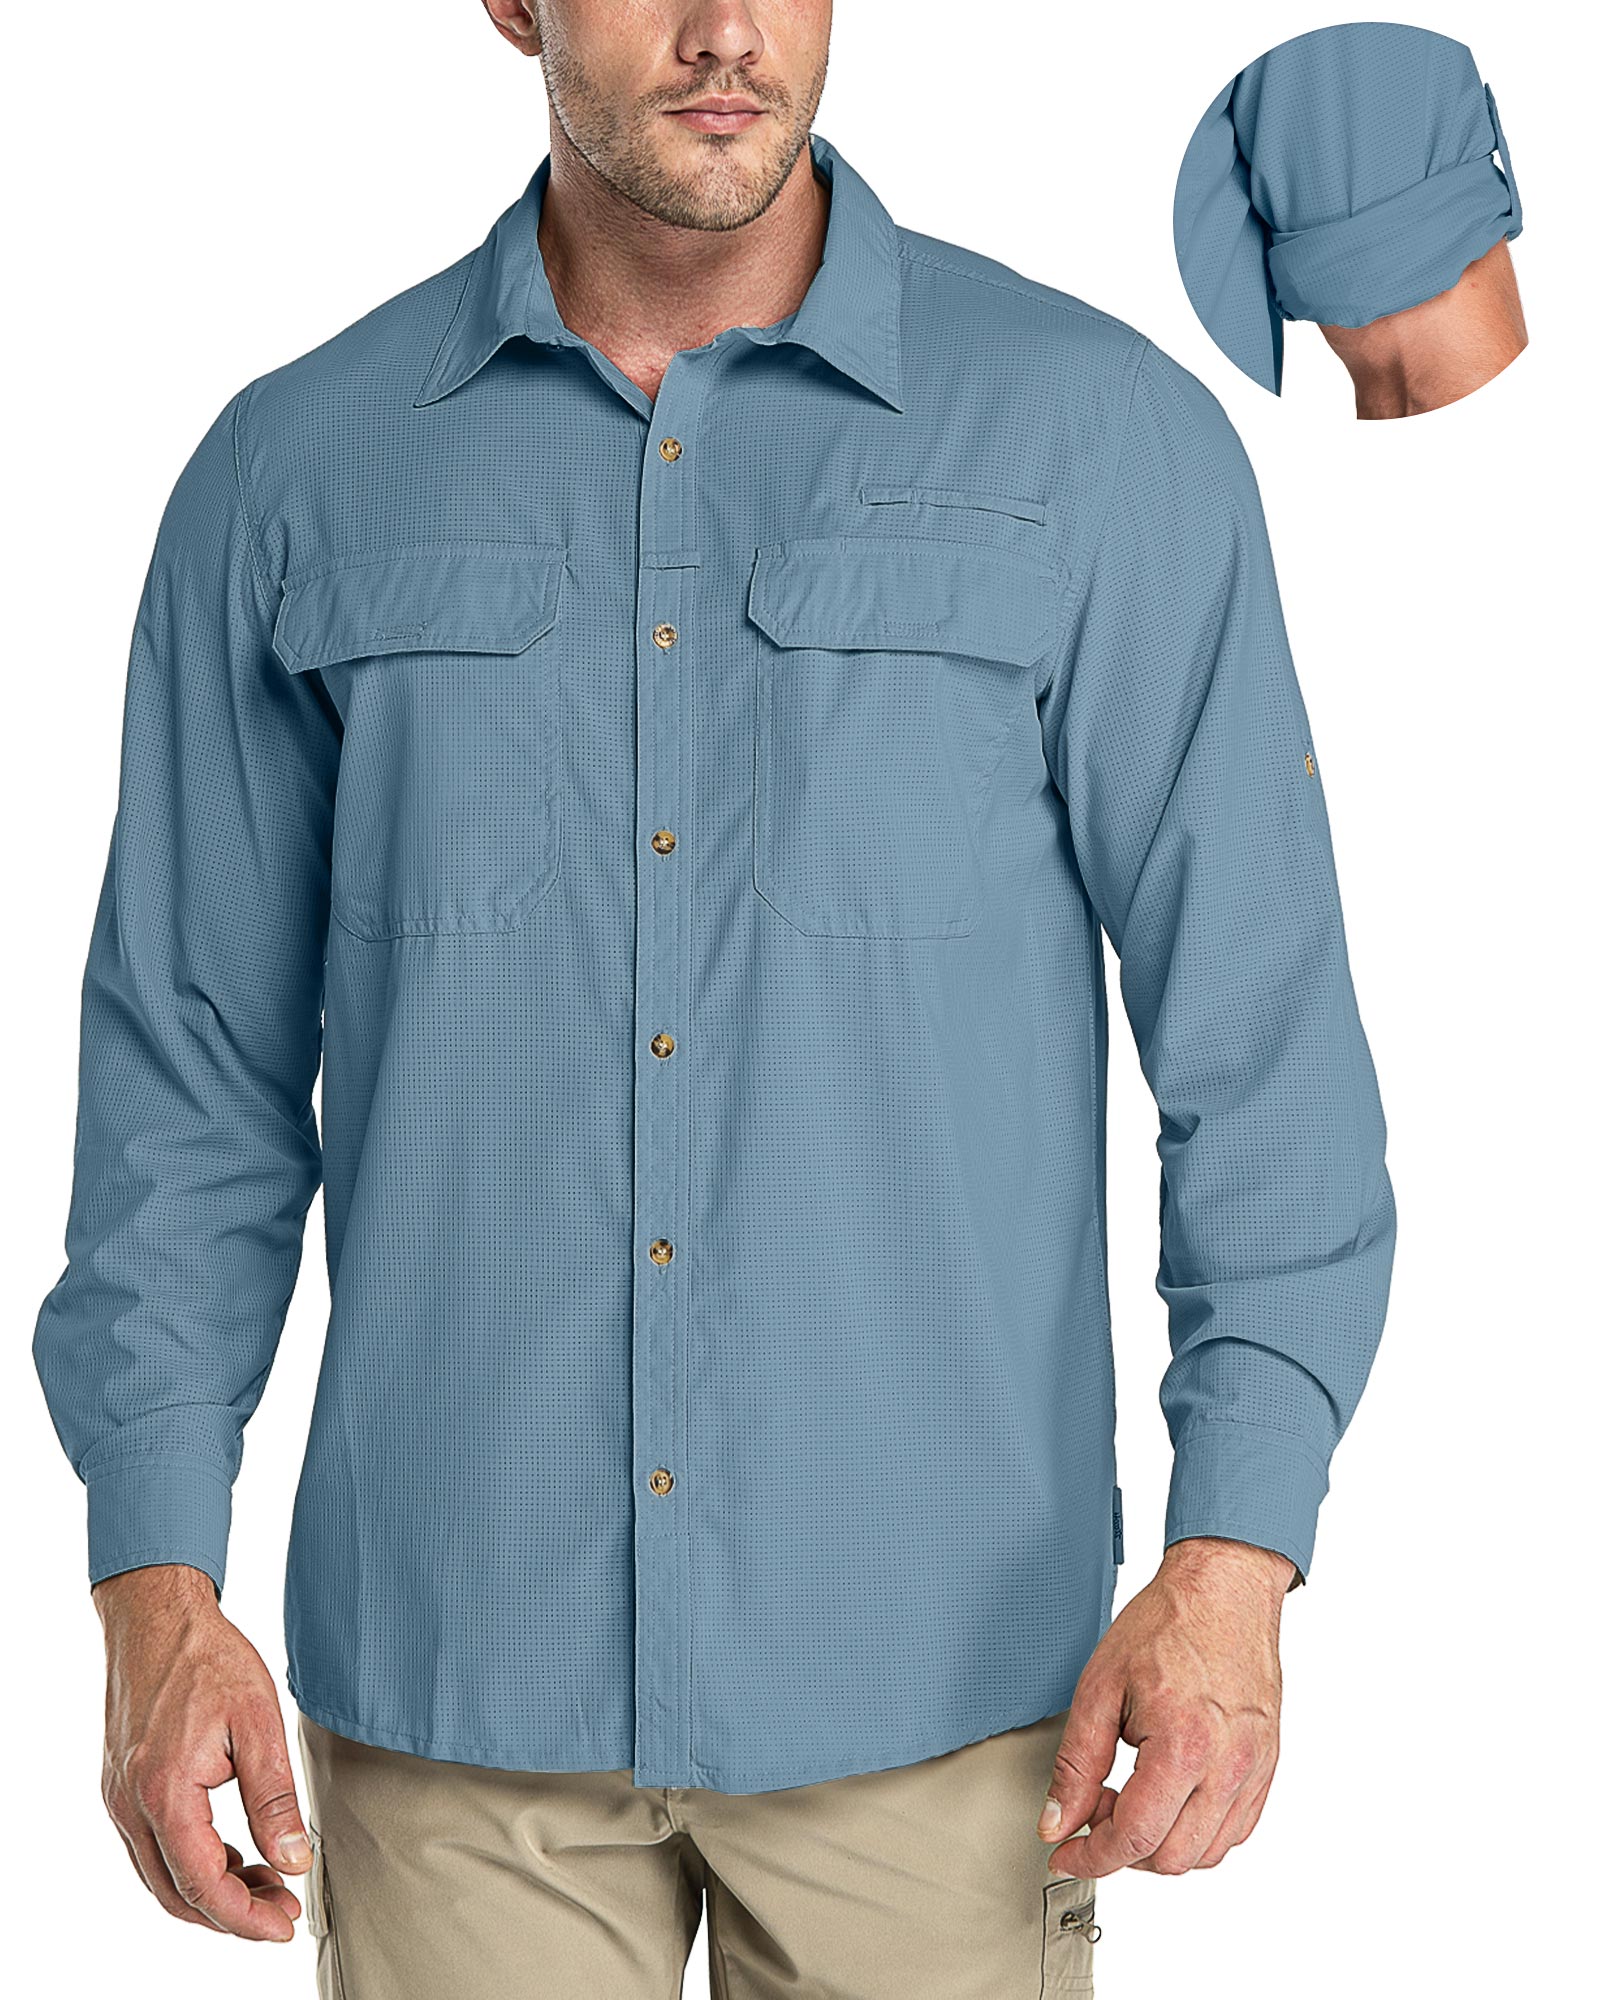 Men's Long Sleeve UPF 50+ GEO® Air-Hole Dry Cooling Shirts with Outdoo –  33,000ft